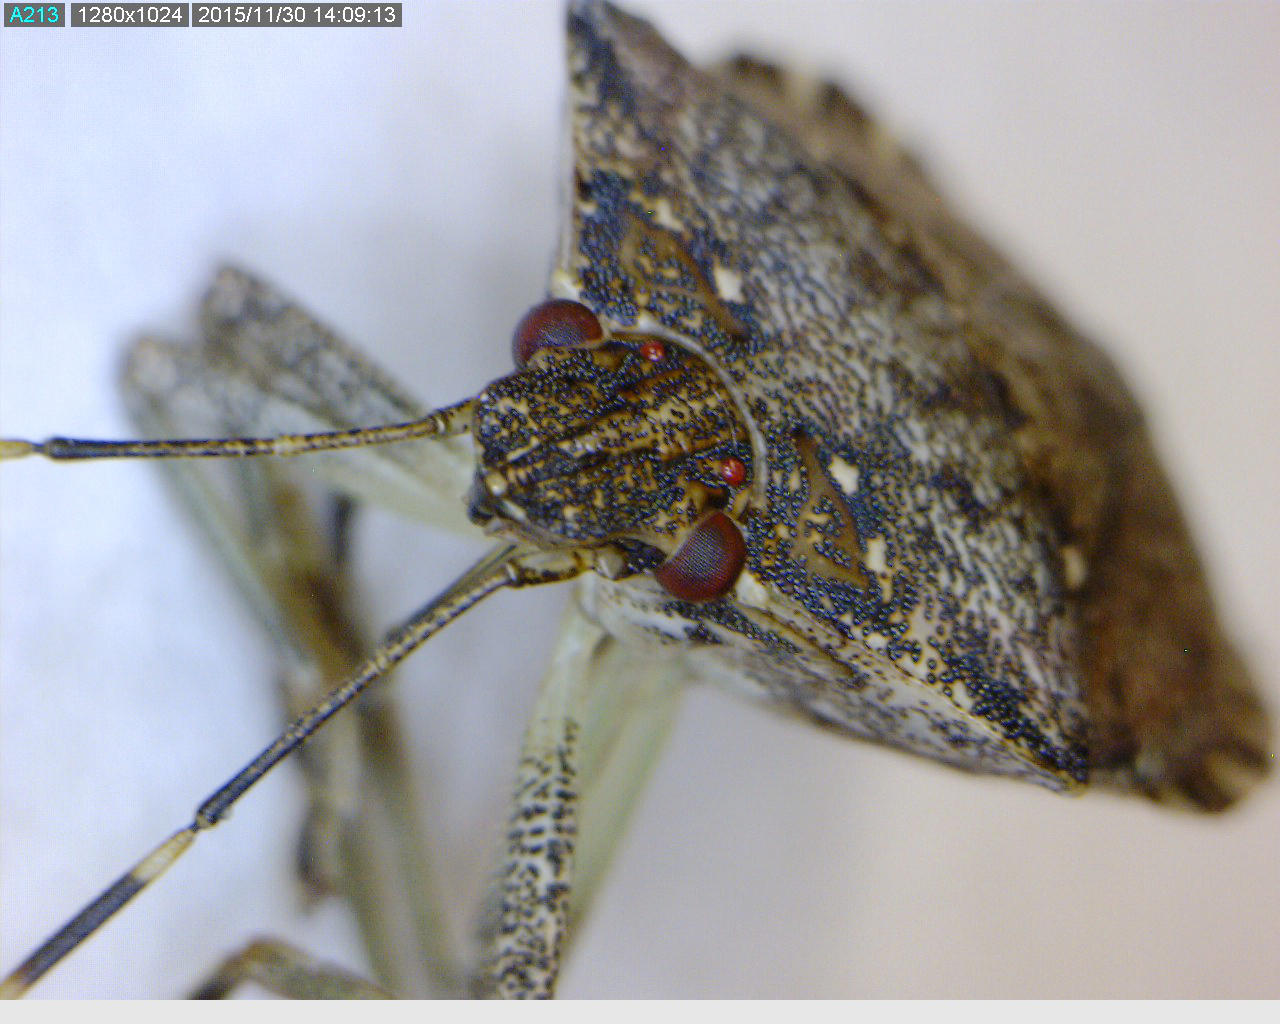 Three or four key characteristics are used to distinguish the brown marmorated stink bug (BMSB) from other stink bugs found in the Pacific Northwest: 1) white bands on the brown antennae, 2) bands on the dorsal (top) side of the peripheral margin of the abdomen, 3) smooth leading edge of the prothorax (shoulders), 4) ‘gem-encrusted’ prothorax just behind the head (on both the dorsal and ventral side).